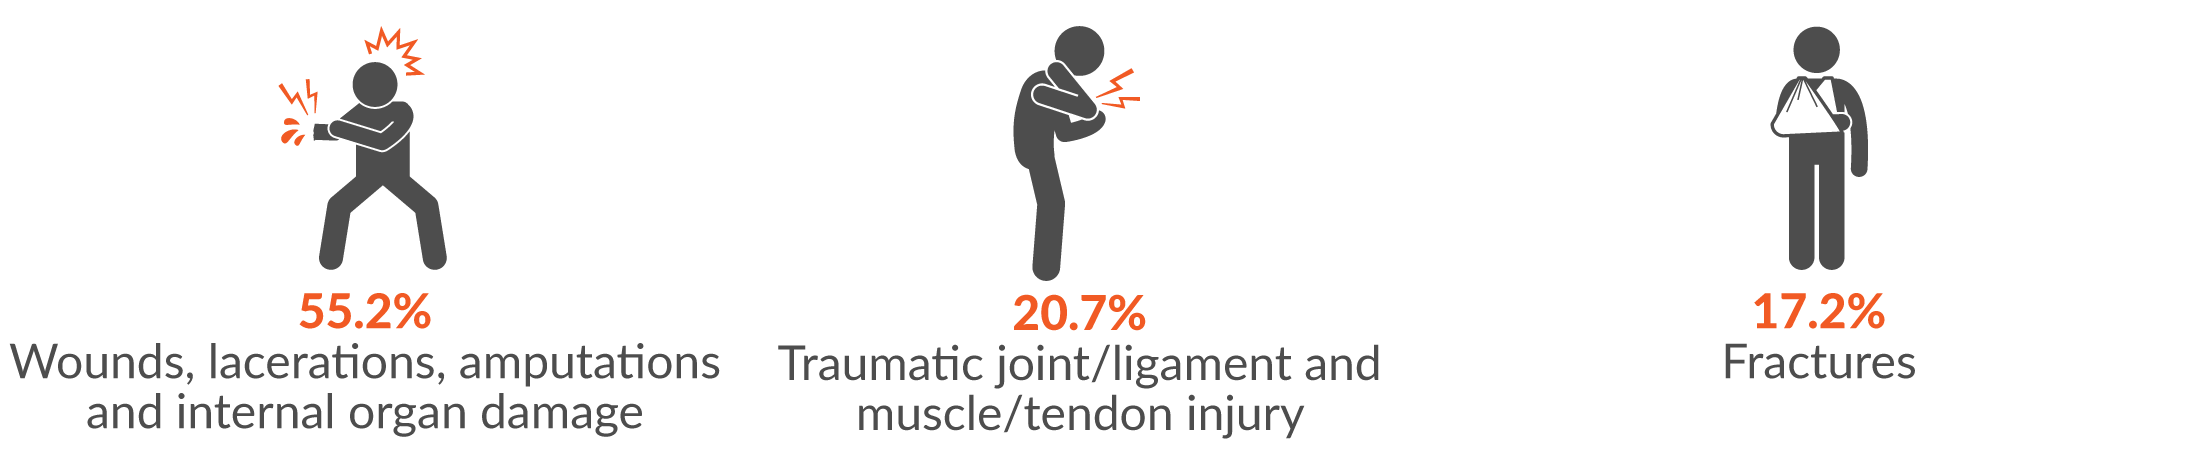 55.2% wounds, lacerations, amputations and internal organ damage; 20.7% traumatic joint/ligament and muscle/tendon injury; and 17.2% fractures.